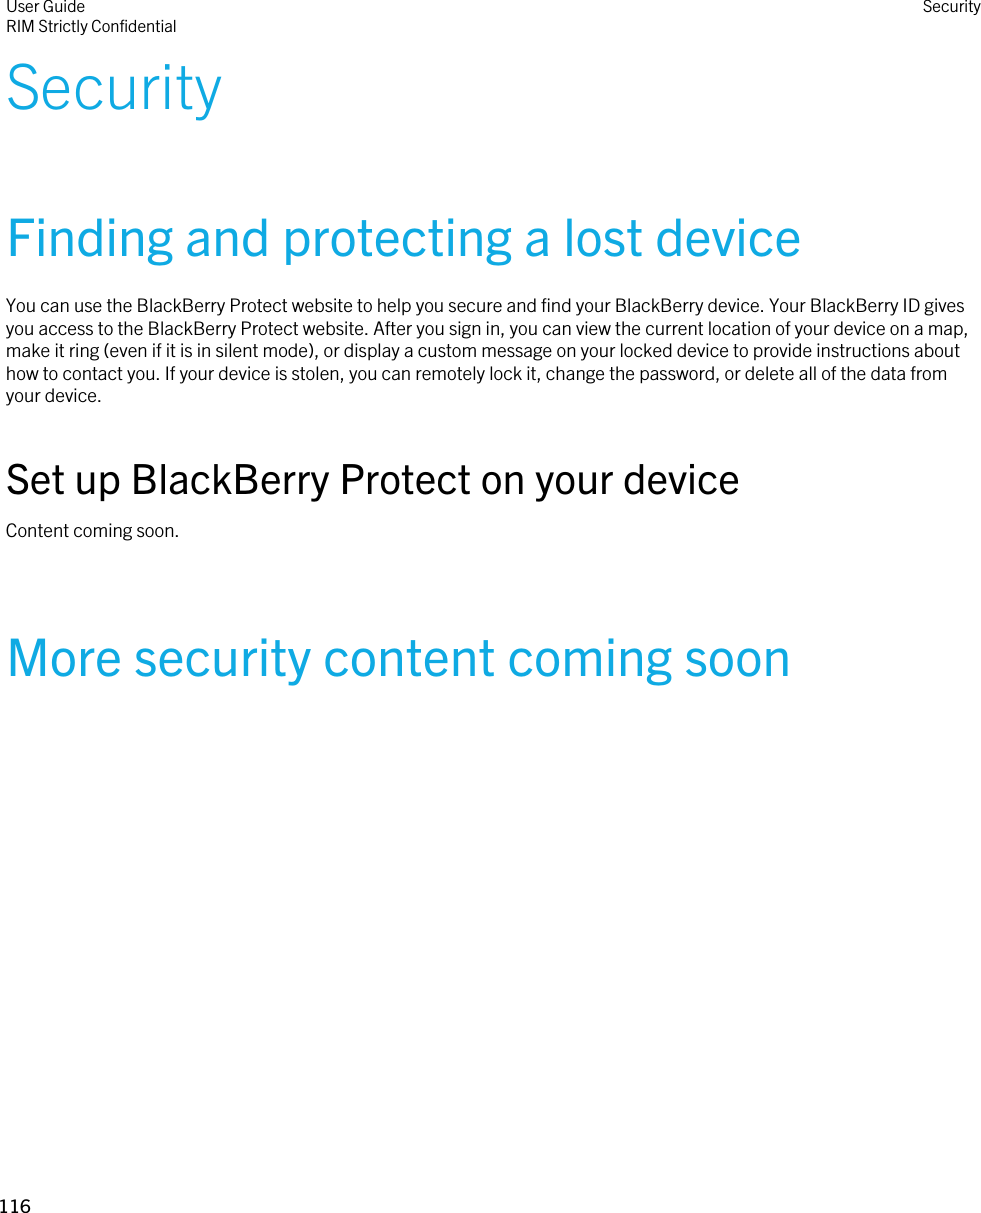 SecurityFinding and protecting a lost deviceYou can use the BlackBerry Protect website to help you secure and find your BlackBerry device. Your BlackBerry ID gives you access to the BlackBerry Protect website. After you sign in, you can view the current location of your device on a map, make it ring (even if it is in silent mode), or display a custom message on your locked device to provide instructions about how to contact you. If your device is stolen, you can remotely lock it, change the password, or delete all of the data from your device.Set up BlackBerry Protect on your deviceContent coming soon.More security content coming soonUser GuideRIM Strictly Confidential Security116 